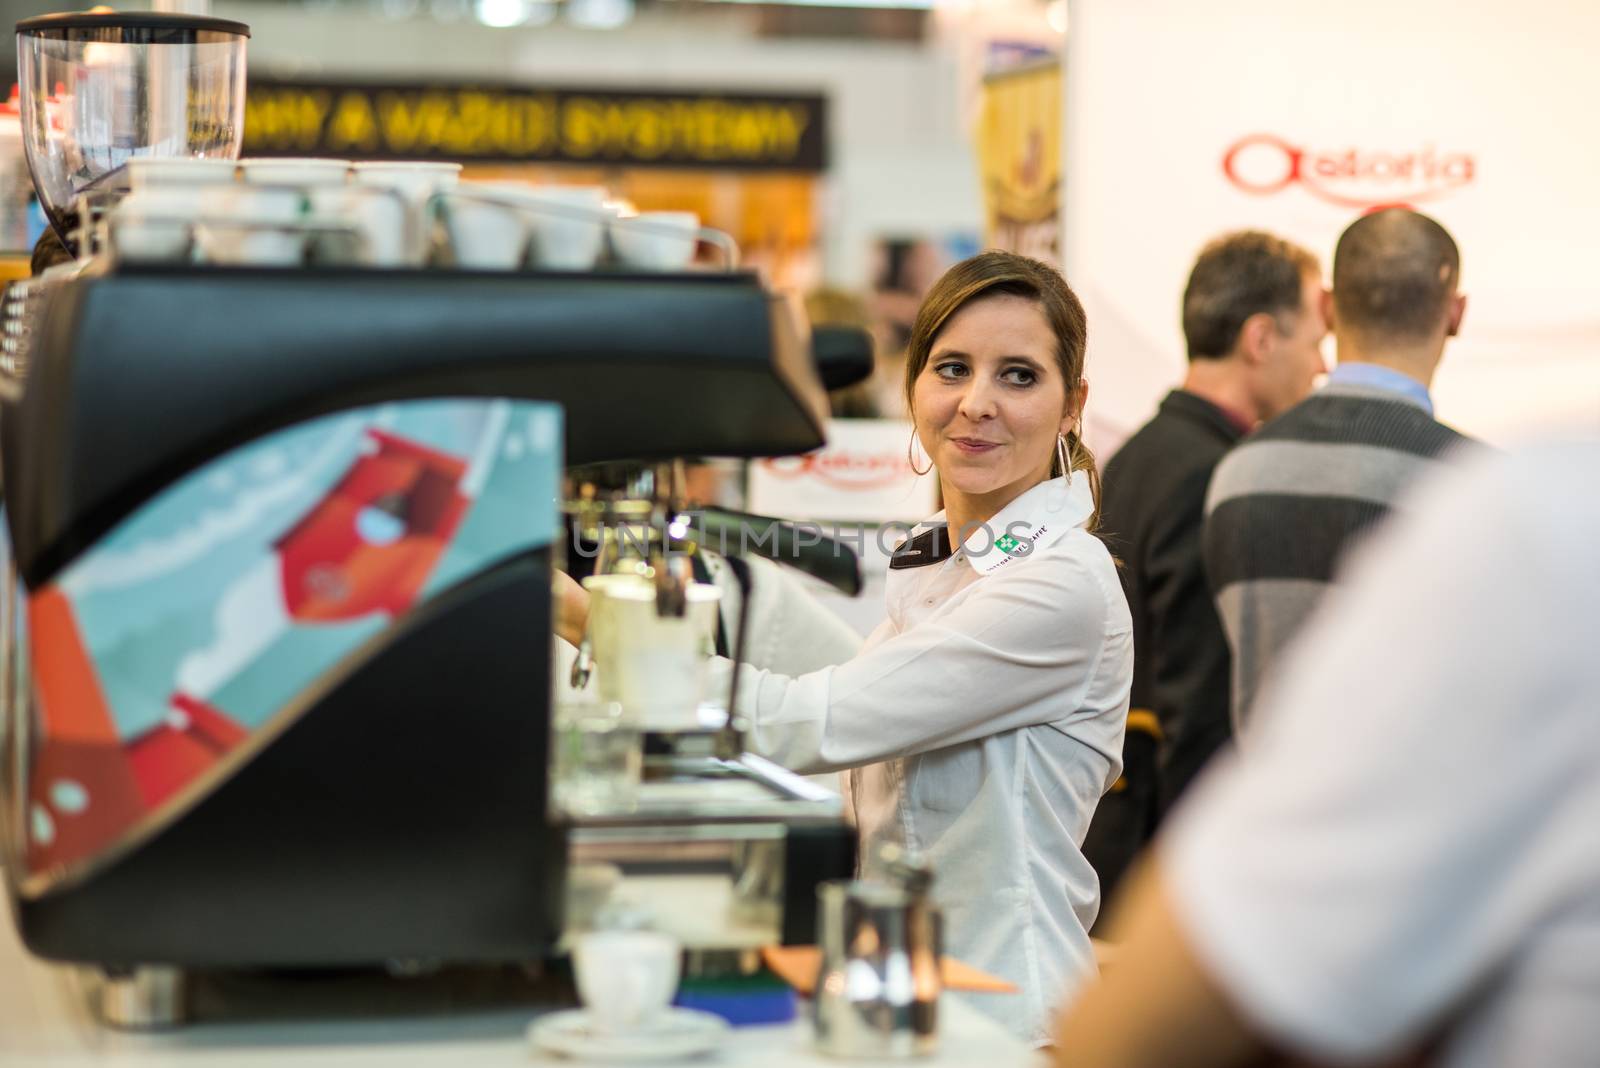 03/04/2018. Brno, Czech Republic. Woman in charge of preparing is preparing coffee to the guest attending an event at the convention trade center in Brno. BVV Brno Exhibition center. Czech Republic by gonzalobell